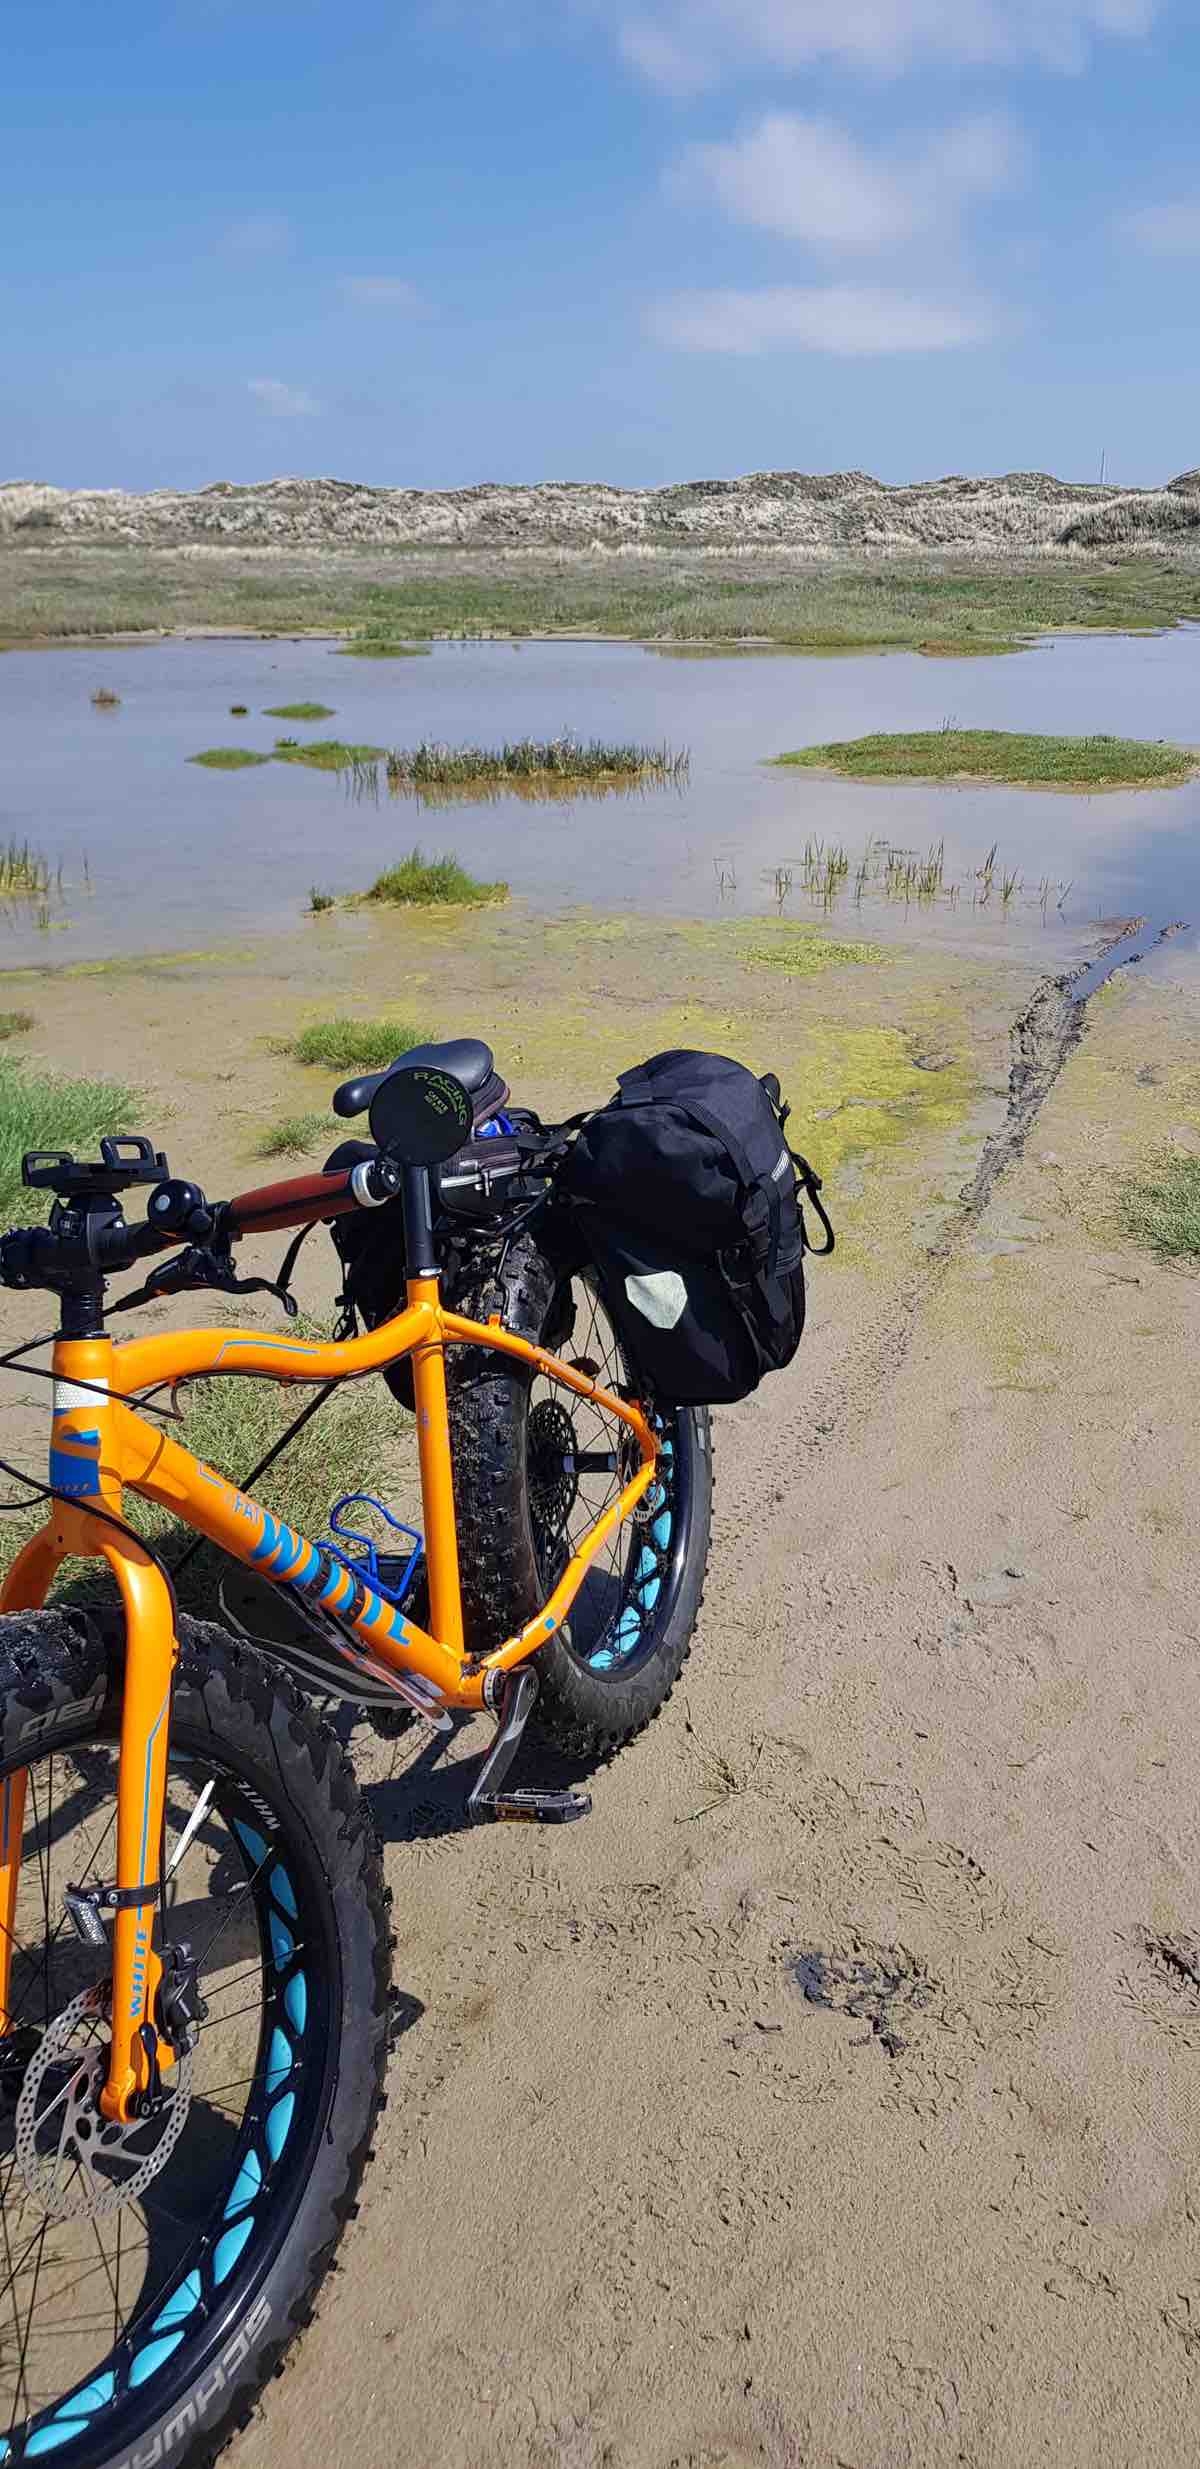 bikerumor pic of the day a fat bike with panniers is on the edge of a body of water with small hills in the distance and a light blue sky with whips of clouds.